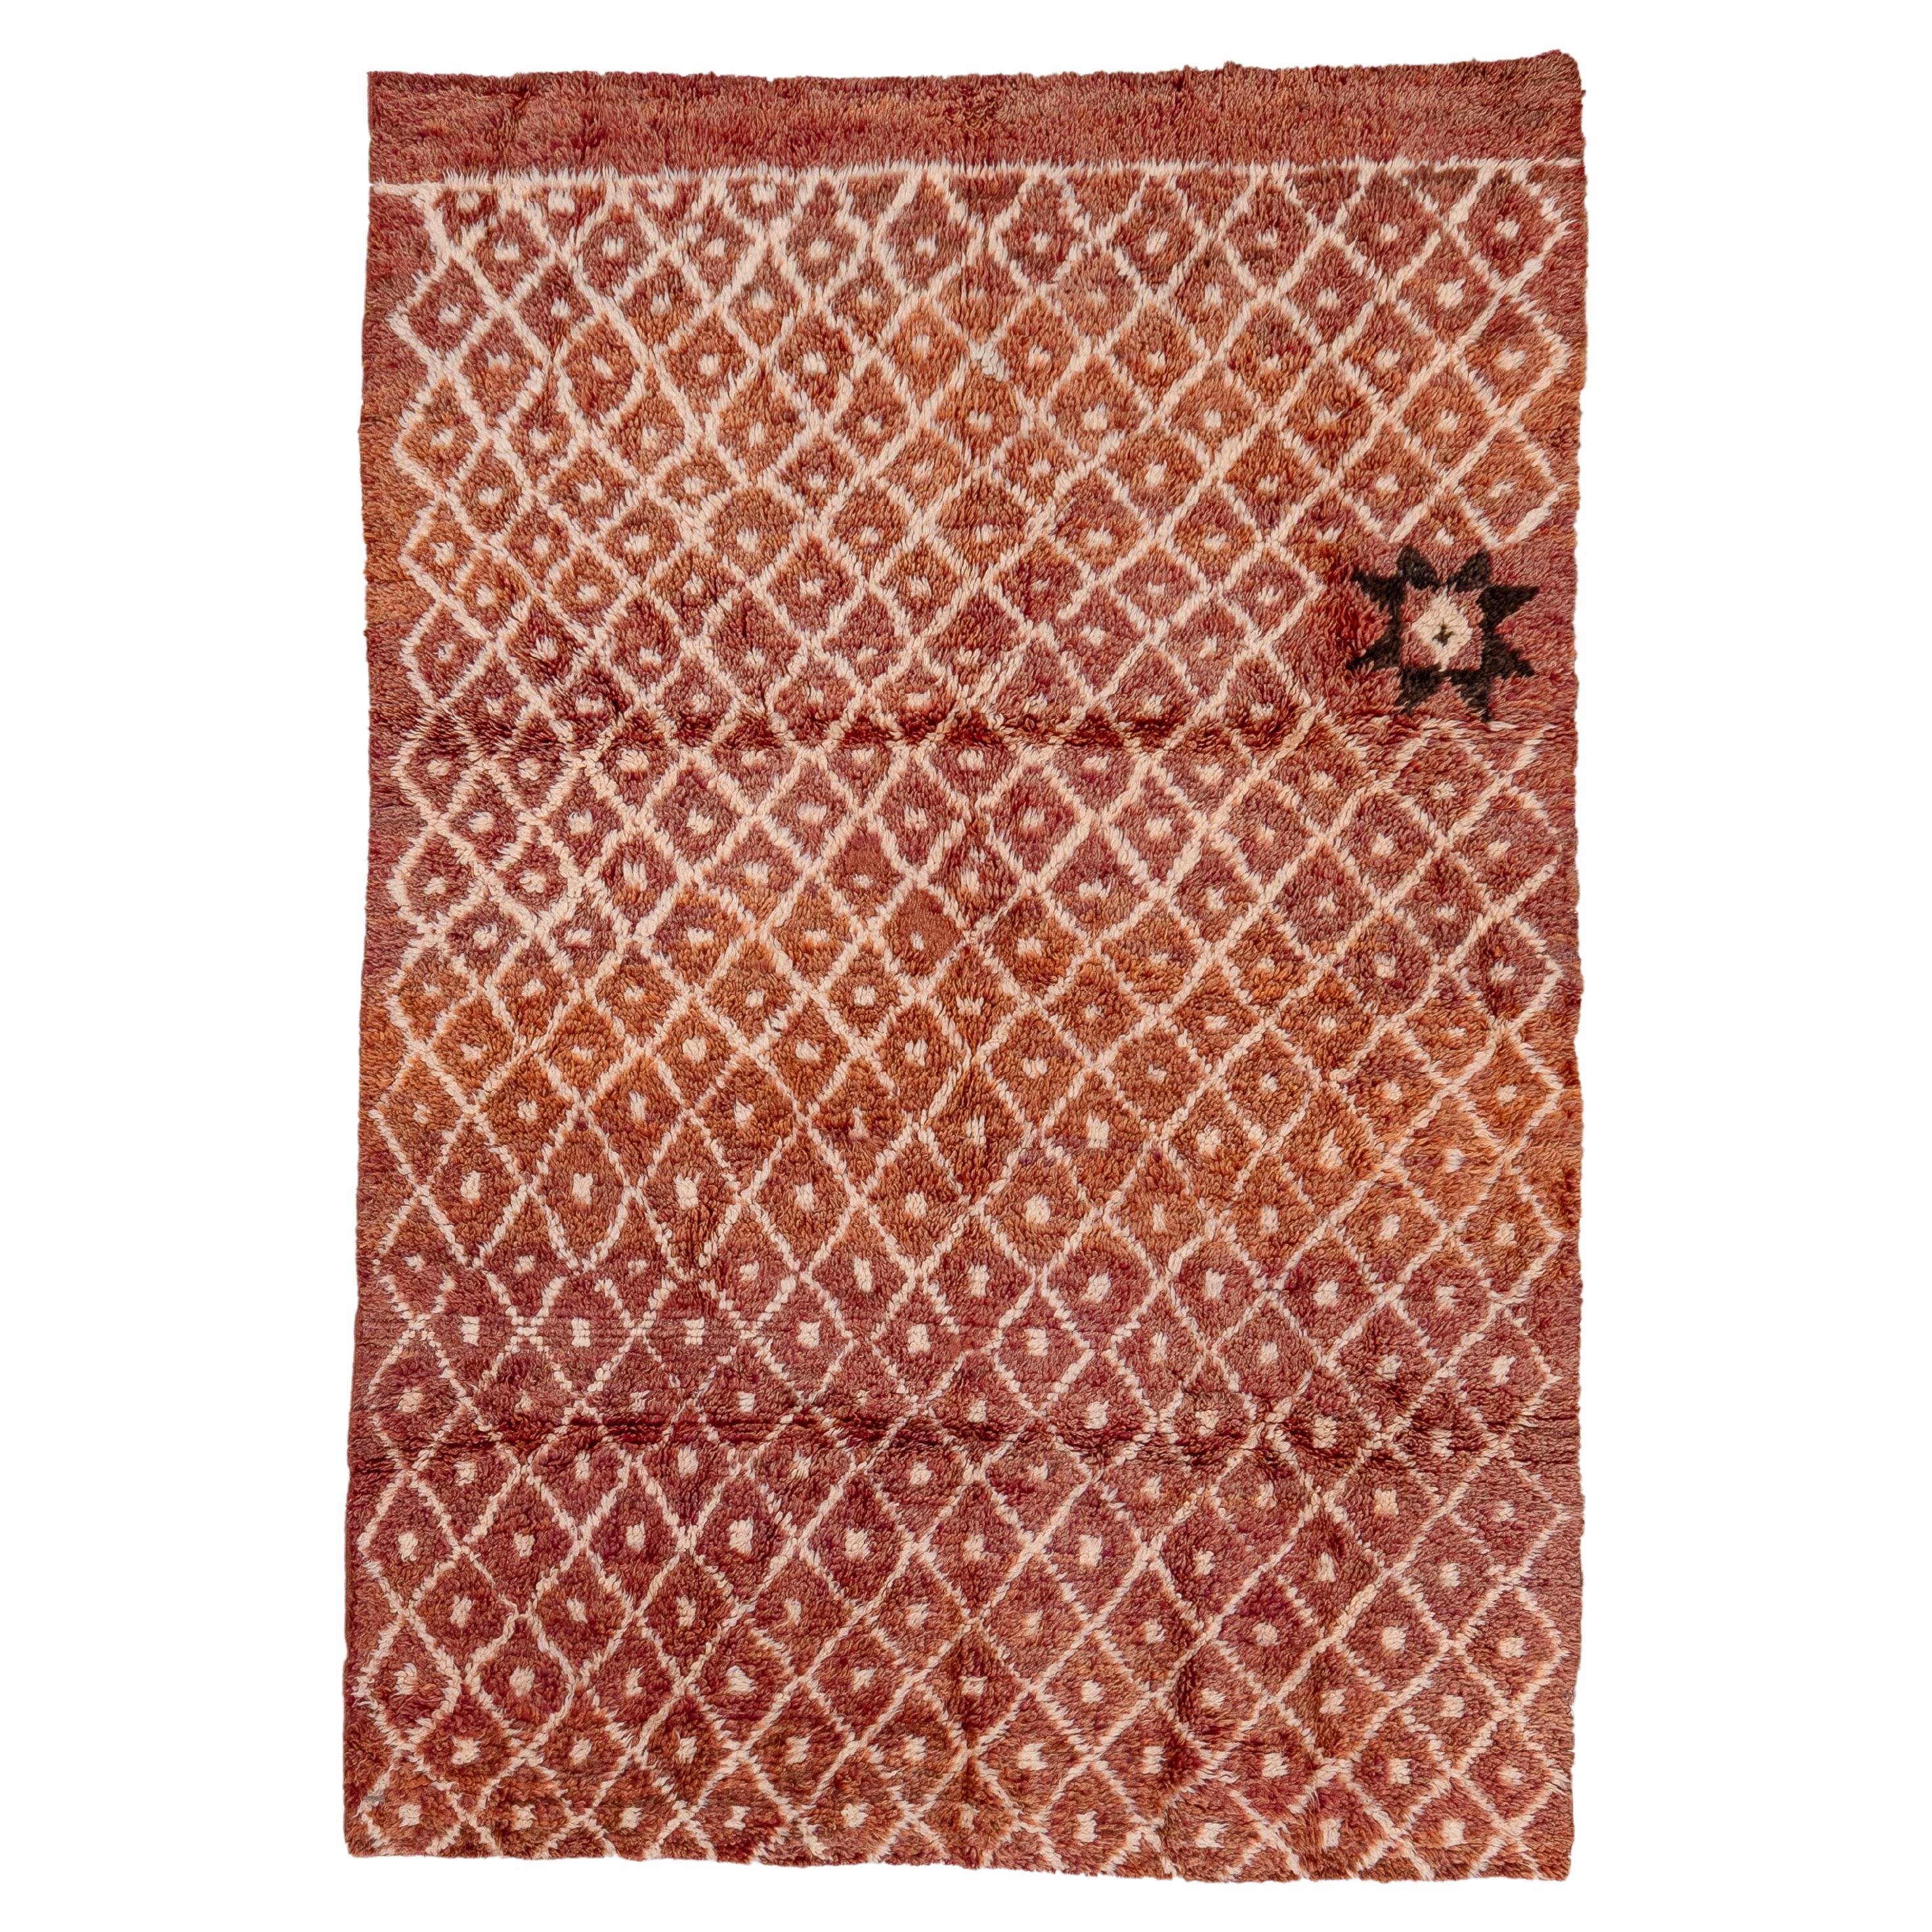 Moroccan Allover Beige Brown with Sun Symbol Accent For Sale